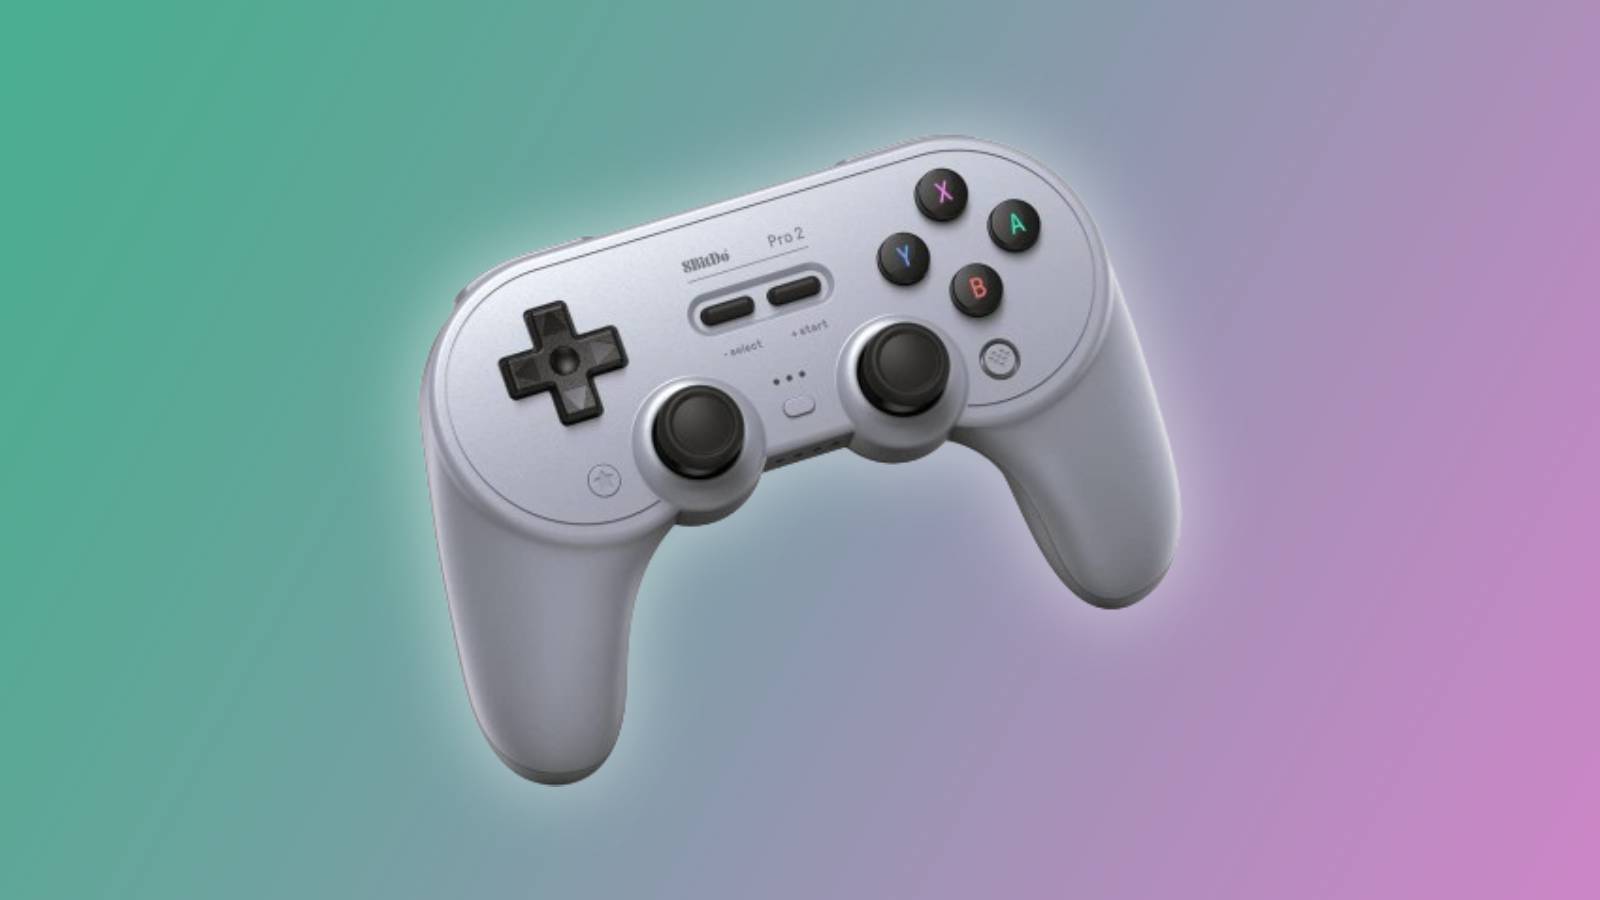 Image of the 8BitDo Pro 2 controller on a green and pink background.